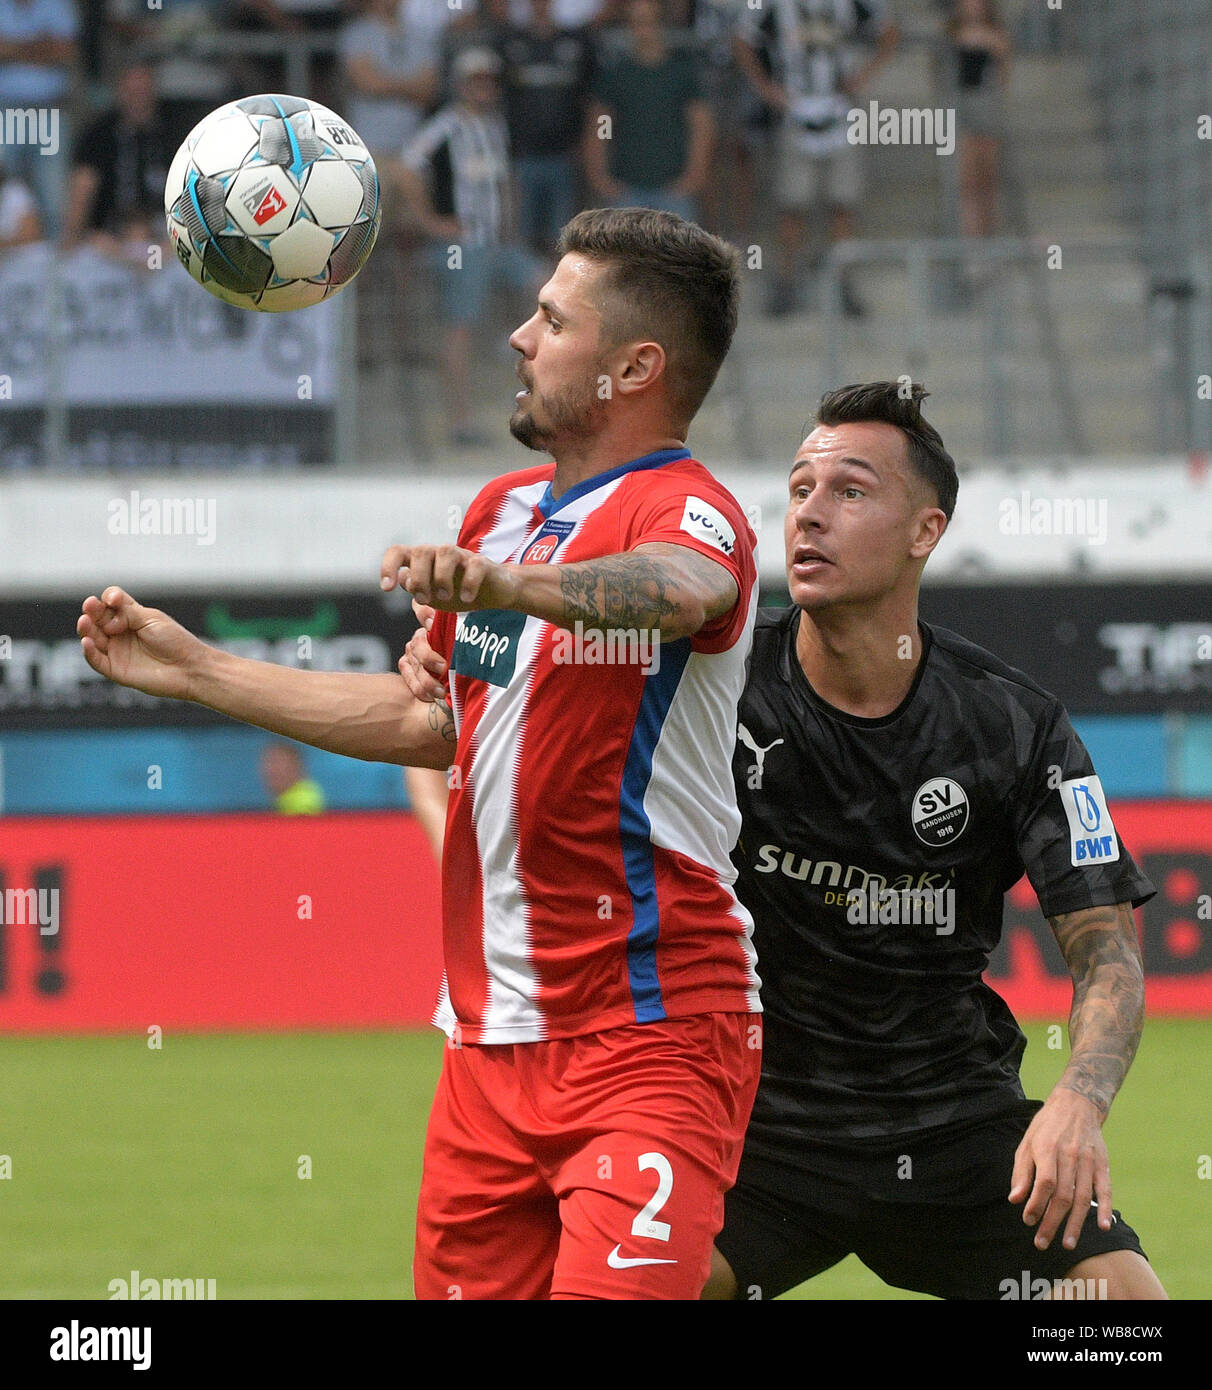 Heidenheim, Germany. 25th Aug, 2019. Soccer: 2nd Bundesliga, 1st FC Heidenheim - SV Sandhausen, 4th matchday in the Voith Arena. Heidenheim's Marnon Busch (l) and Mario Engels von Sandhausen fight for the ball. Credit: Stefan Puchner/dpa - IMPORTANT NOTE: In accordance with the requirements of the DFL Deutsche Fußball Liga or the DFB Deutscher Fußball-Bund, it is prohibited to use or have used photographs taken in the stadium and/or the match in the form of sequence images and/or video-like photo sequences./dpa/Alamy Live News Stock Photo